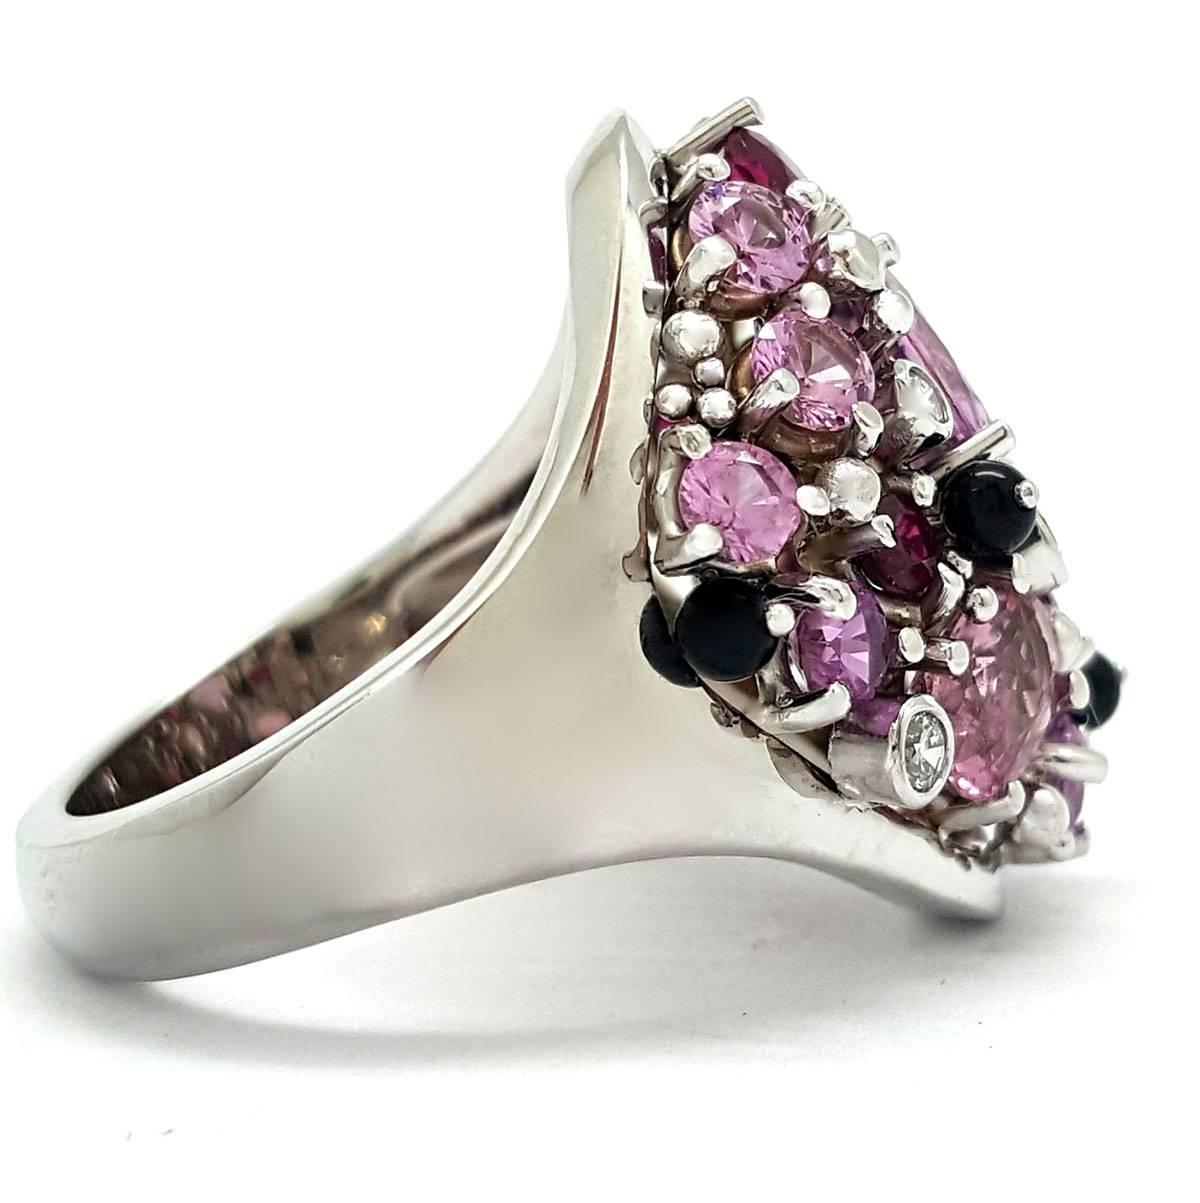 Marvelous 14k White Gold, Pink Sapphire & Diamond Confetti Cocktail Ring In Excellent Condition For Sale In Scottsdale, AZ